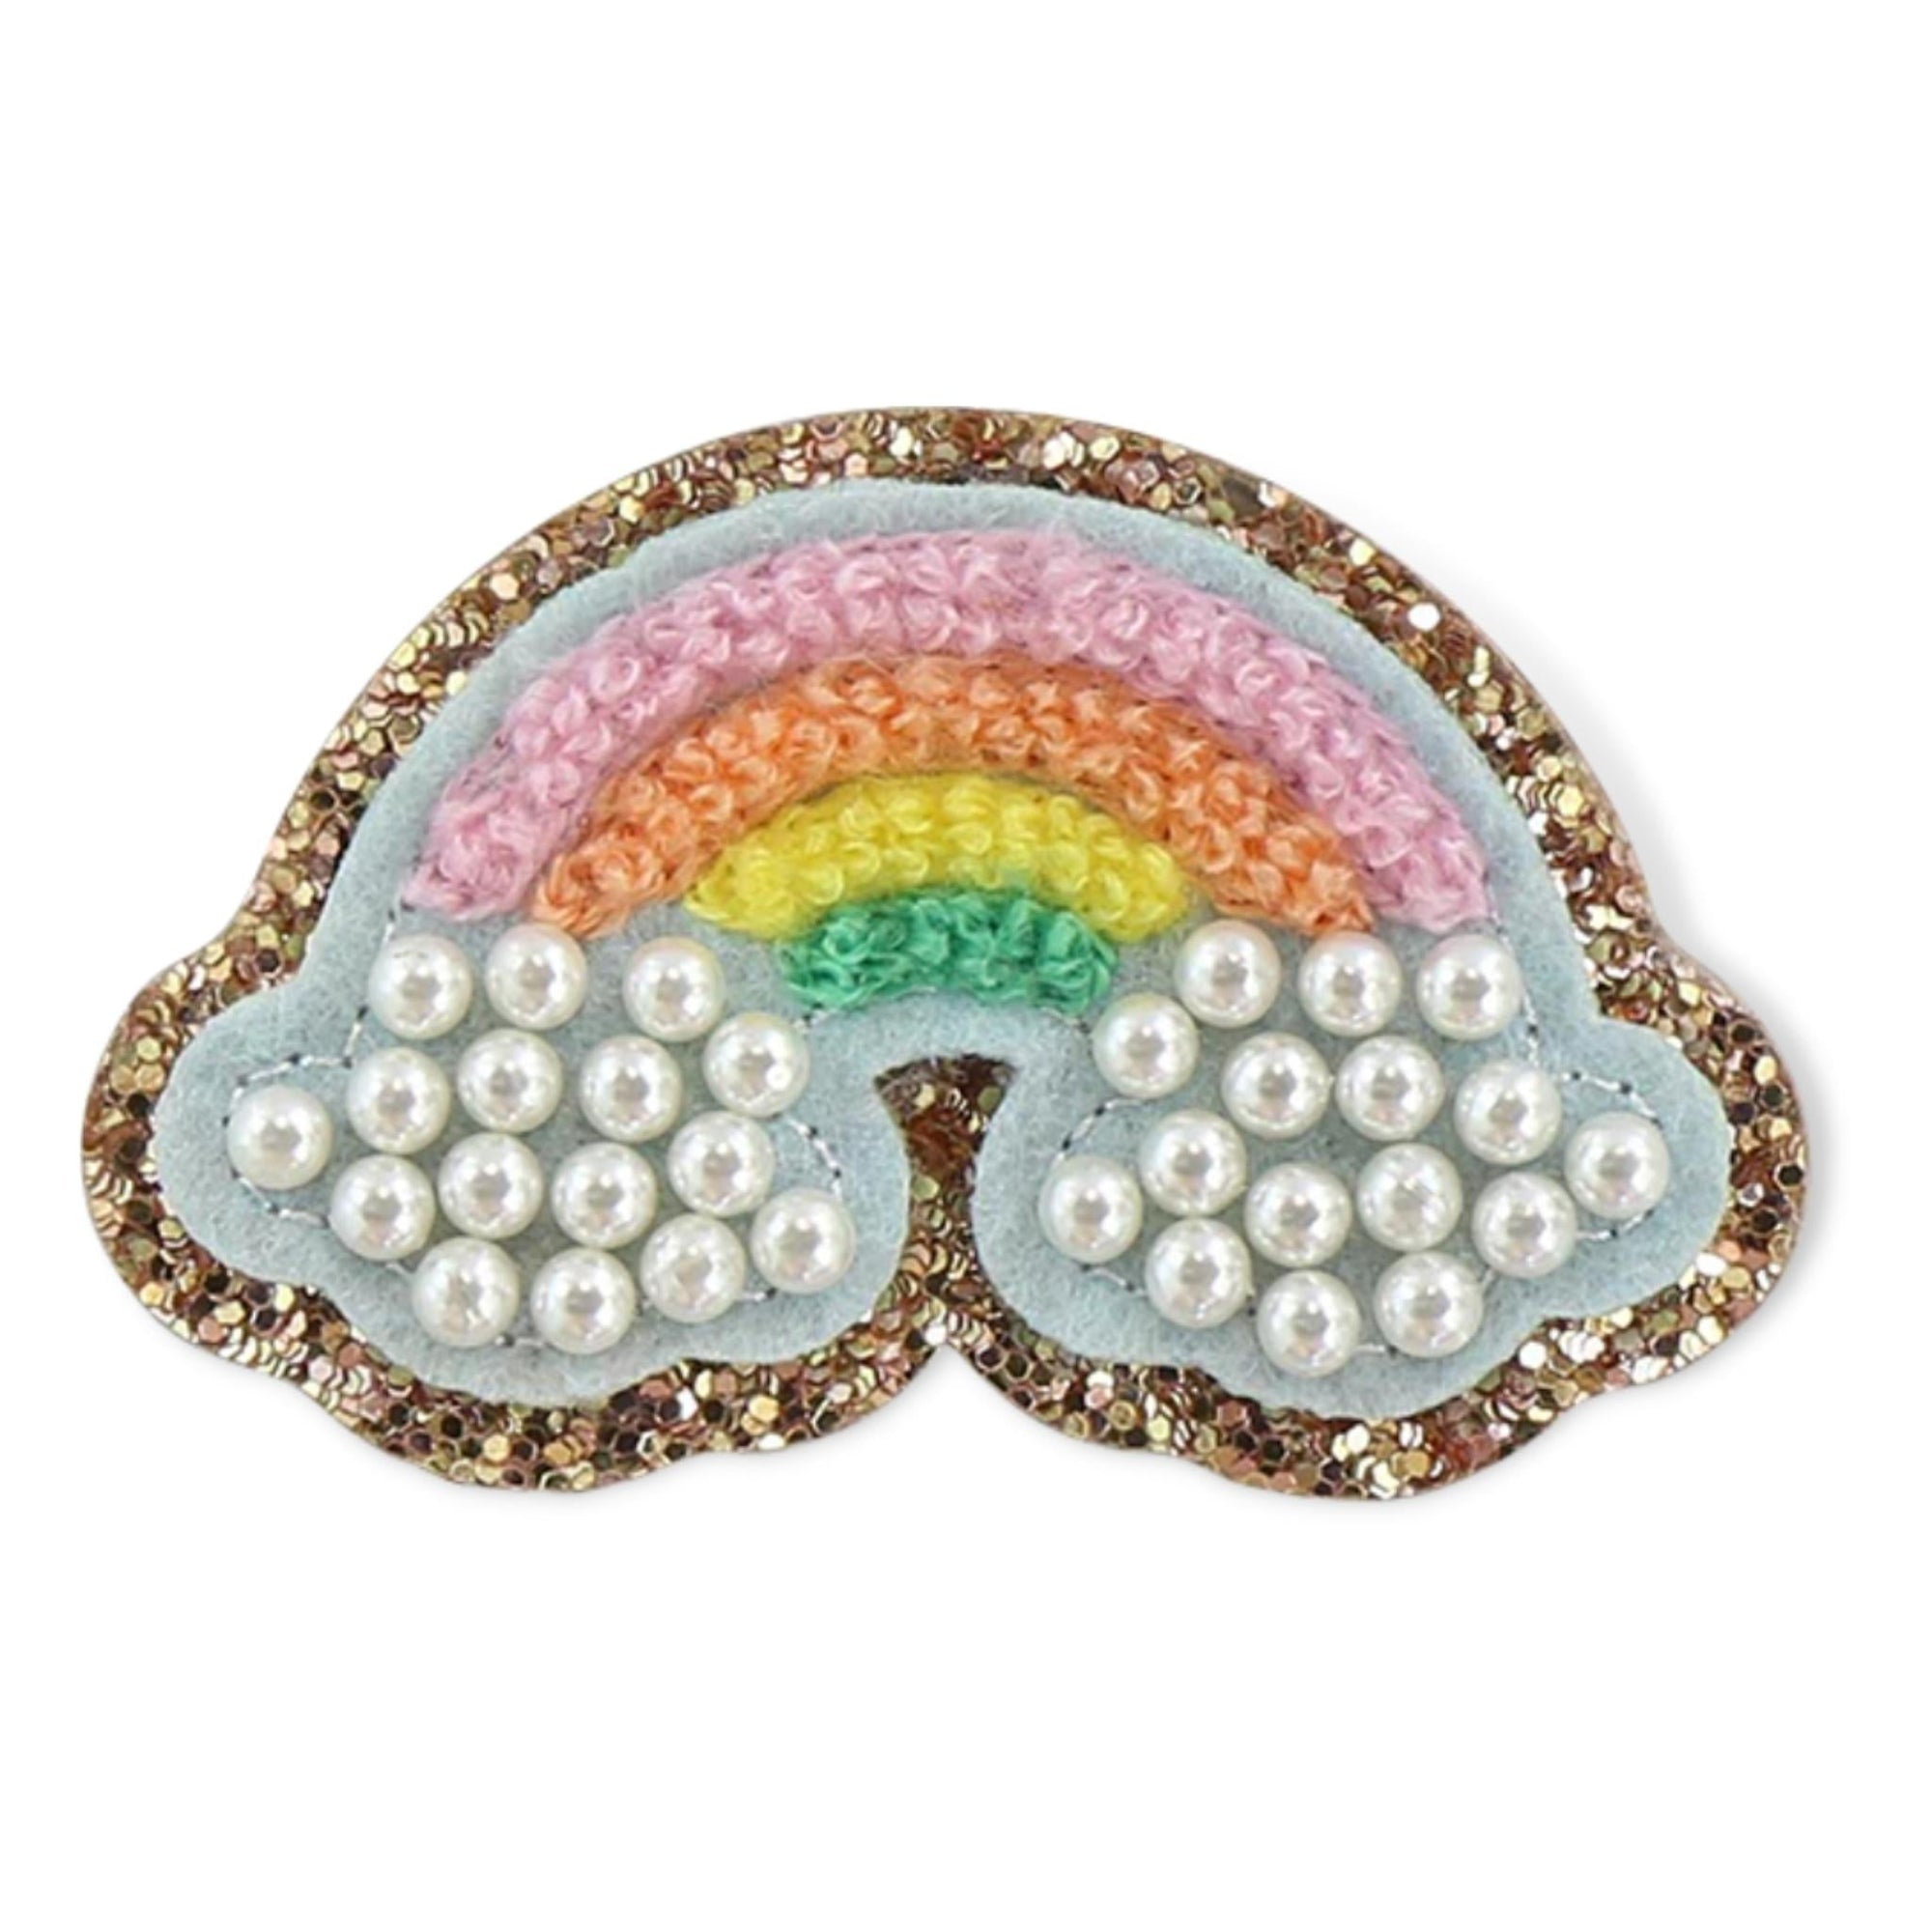 SCLN Core Glitter Pearl Rainbow Patch - a Spirit Animal - Patches active Aug 2022 Clover gifts